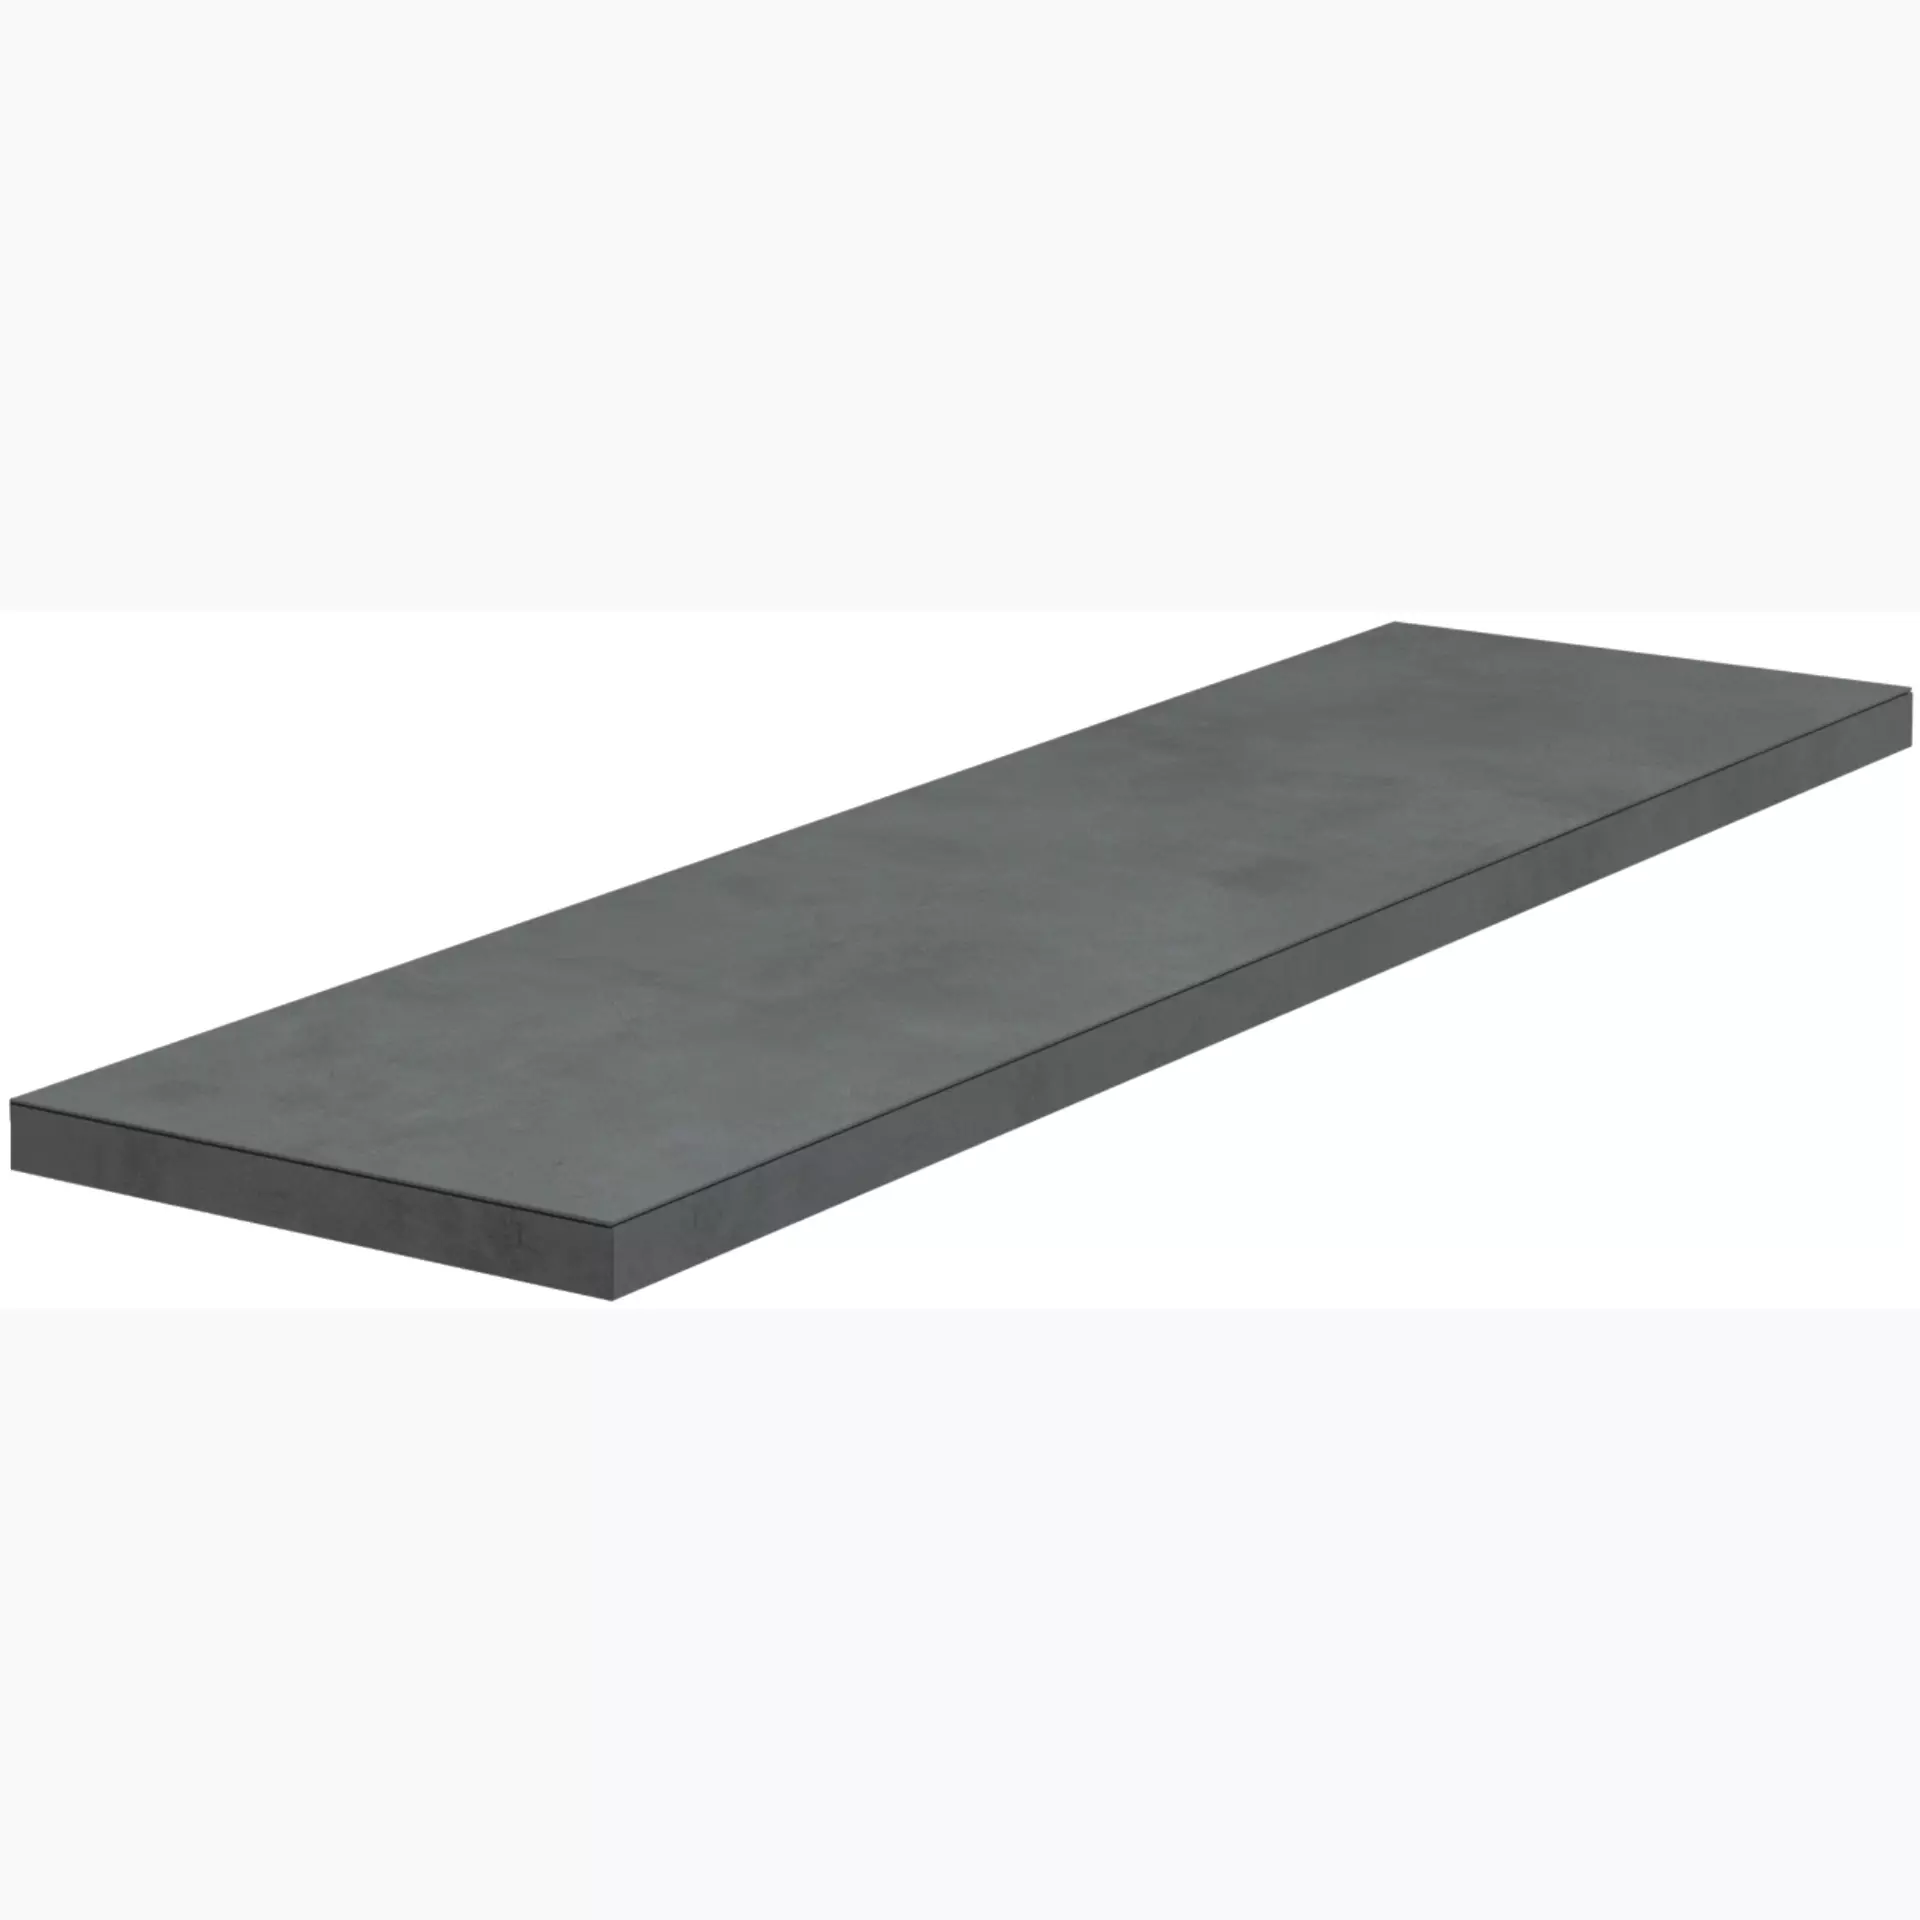 Del Conca Htl Timeline Nightfall Htl02 Naturale Corner plate Step Left G3TL02RGS12 33x120cm rectified 8,5mm